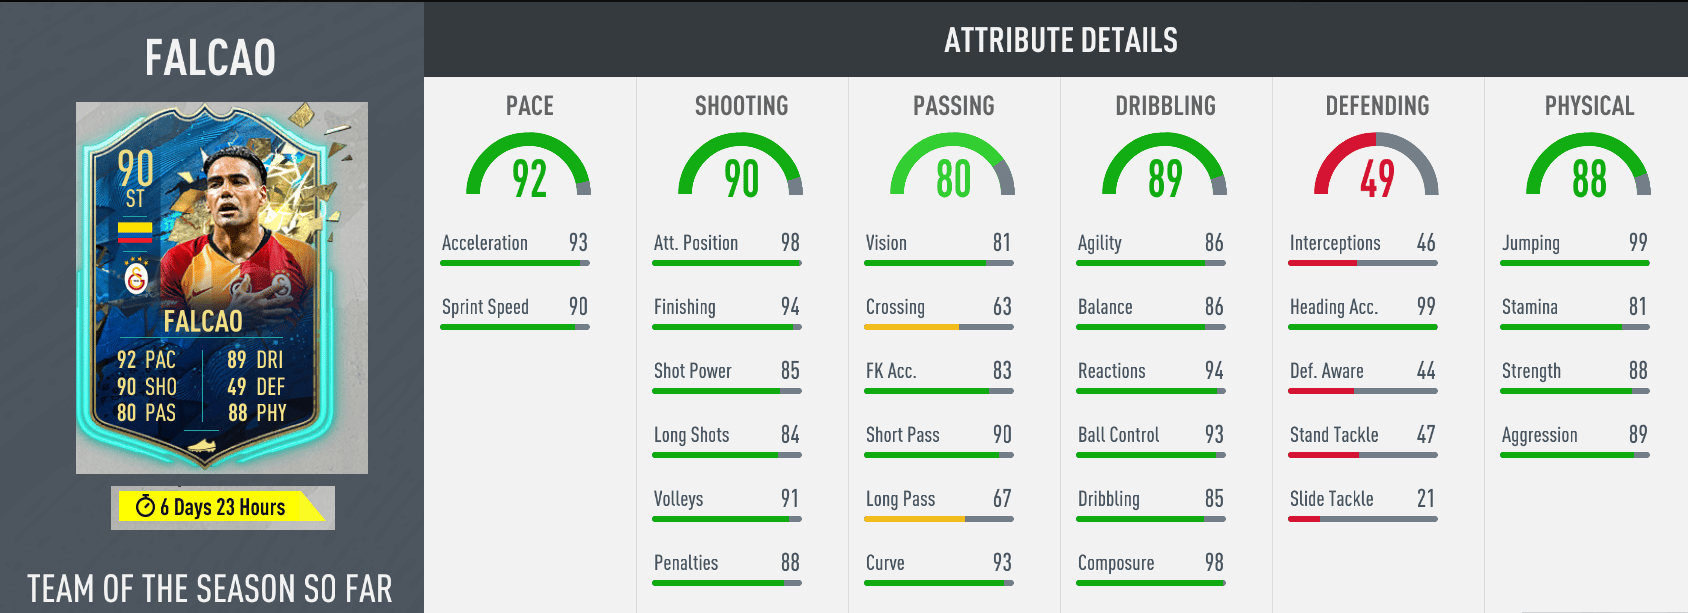 In-game stats for Falcao's TOTSSF Challenge card in FIFA 20 Ultimate Team FUT.